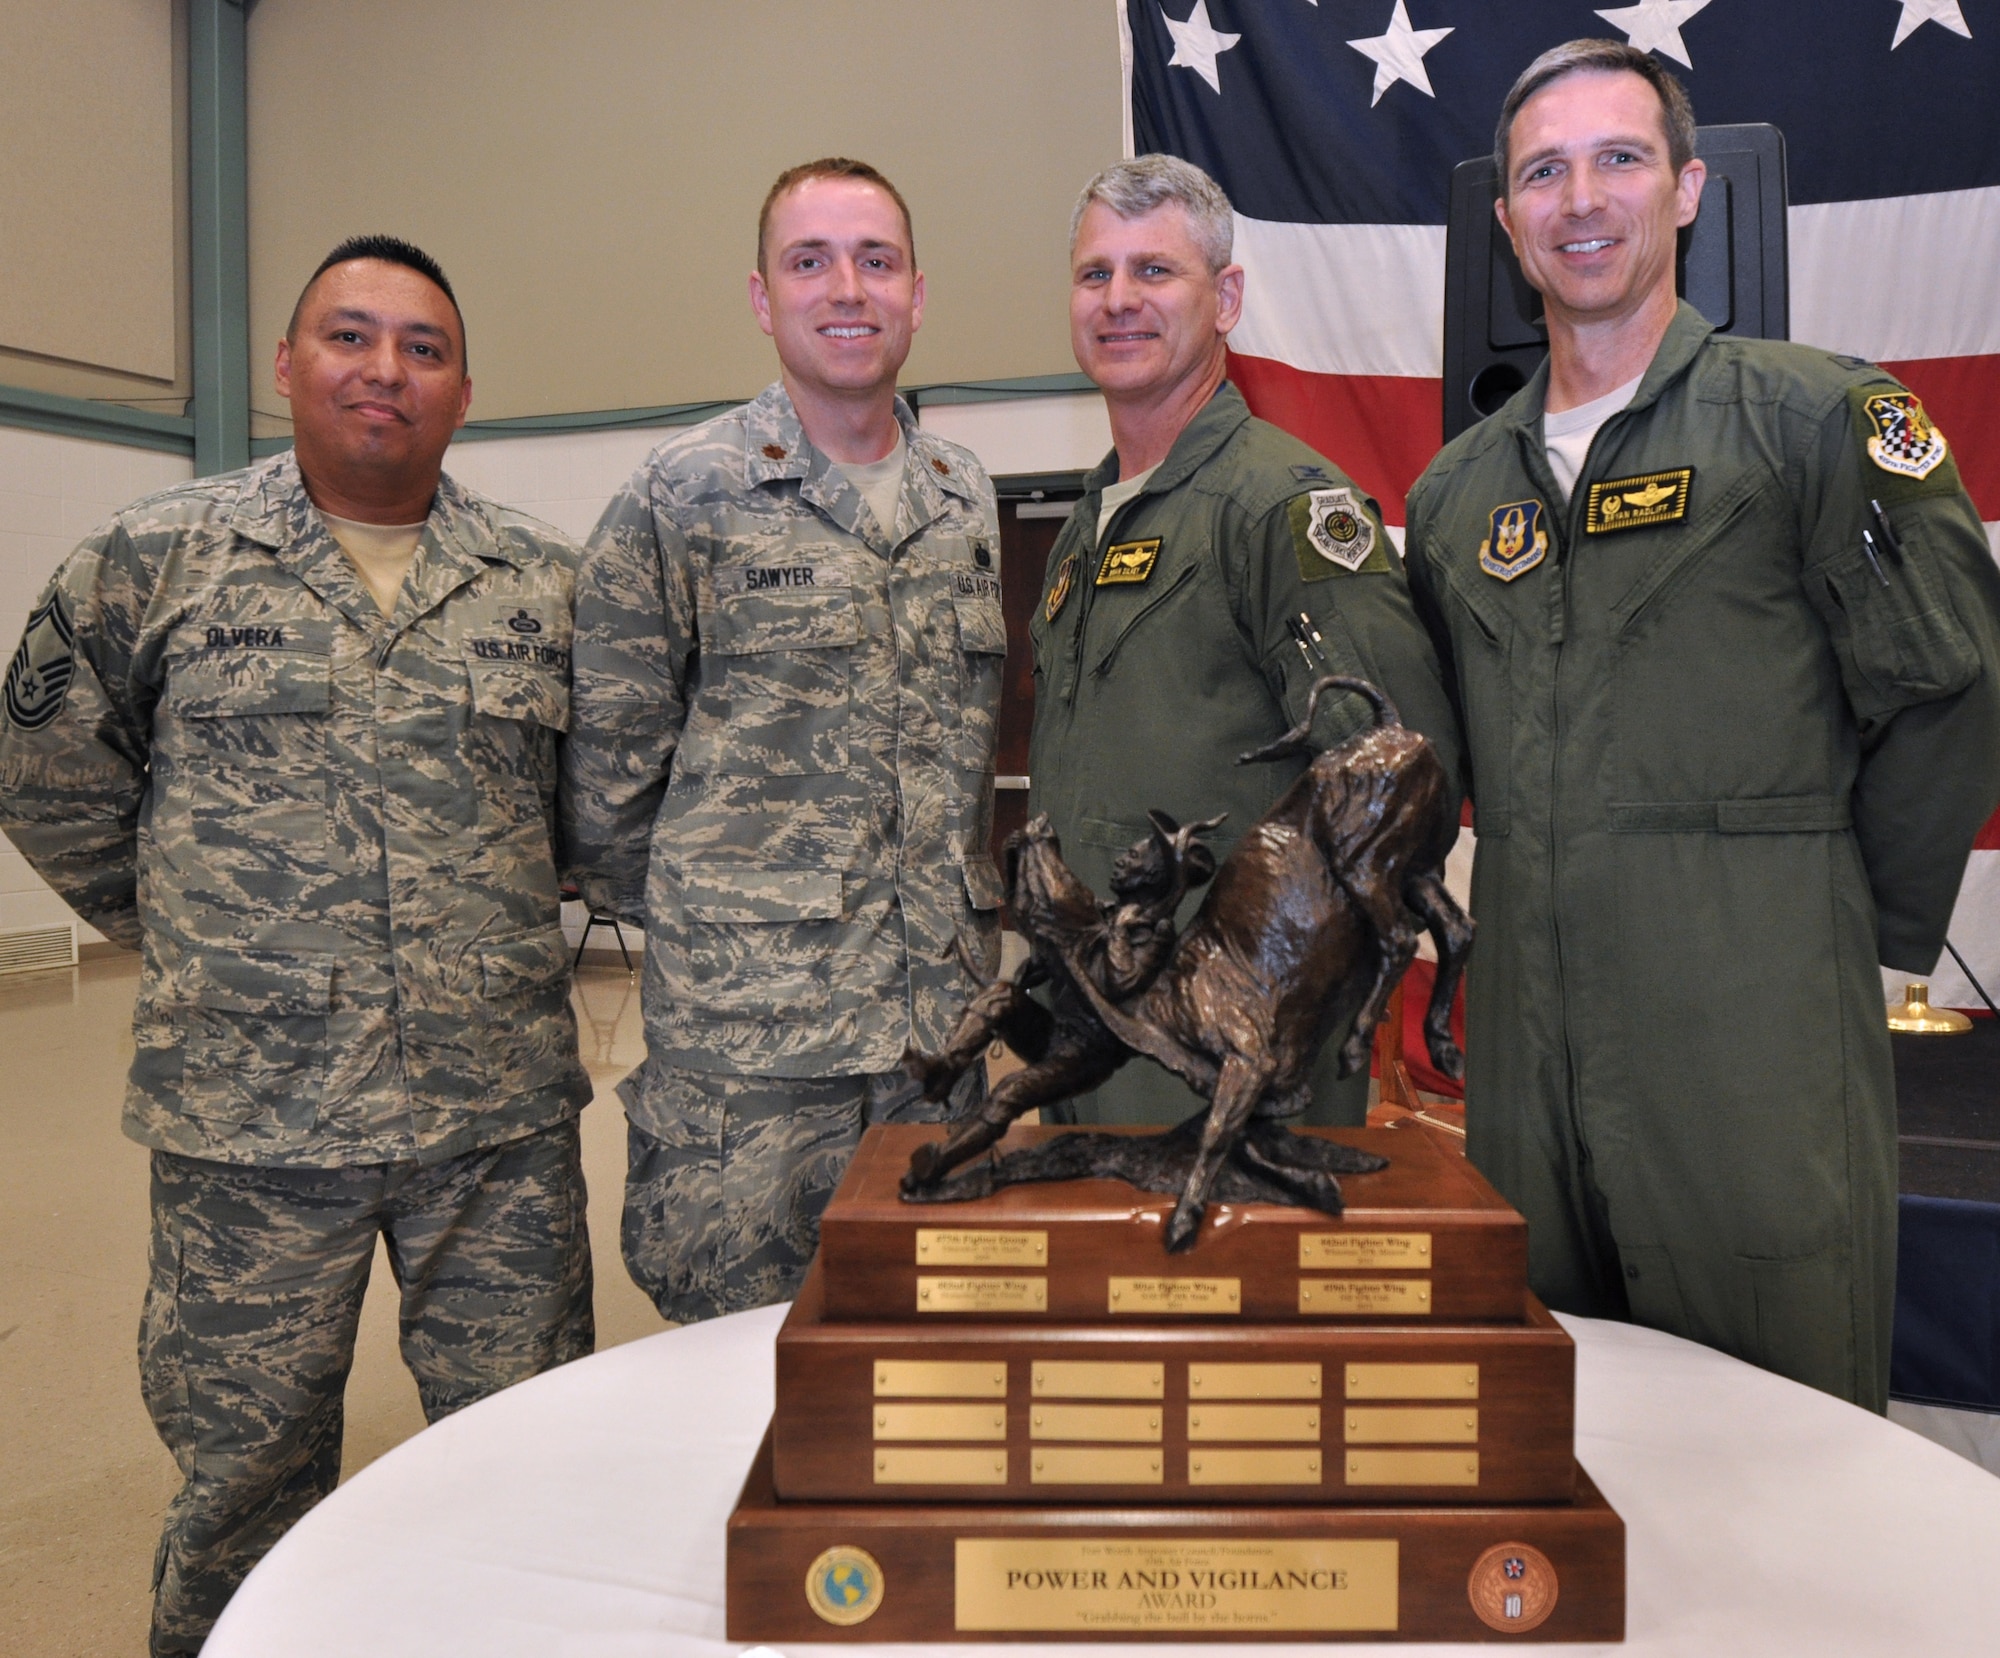 As the latest recipients of the 10th Air Force Power and Vigilance award, members of the 419th Fighter Wing pose with the trophy. The 419th Fighter Wing at Hill Air Force Base, Utah, was recently proclaimed the premier unit within 10th Air Force, winning trophy bragging rights for the year. The Power and Vigilance Award is presented annually to the 10 AF Reserve unit that exhibits the NAF mission as "the premier provider of affordable, integrated, flexible, and mission-ready Citizen Airmen to execute power and vigilance missions in support of U.S. National Security.” The symbolism of the bronze figure on the award says it all, ‘grabbing the bull by the horns’.  They are only the fifth unit to hold this honor. (U.S. Air Force photo/Master Sgt. Julie Briden-Garcia)